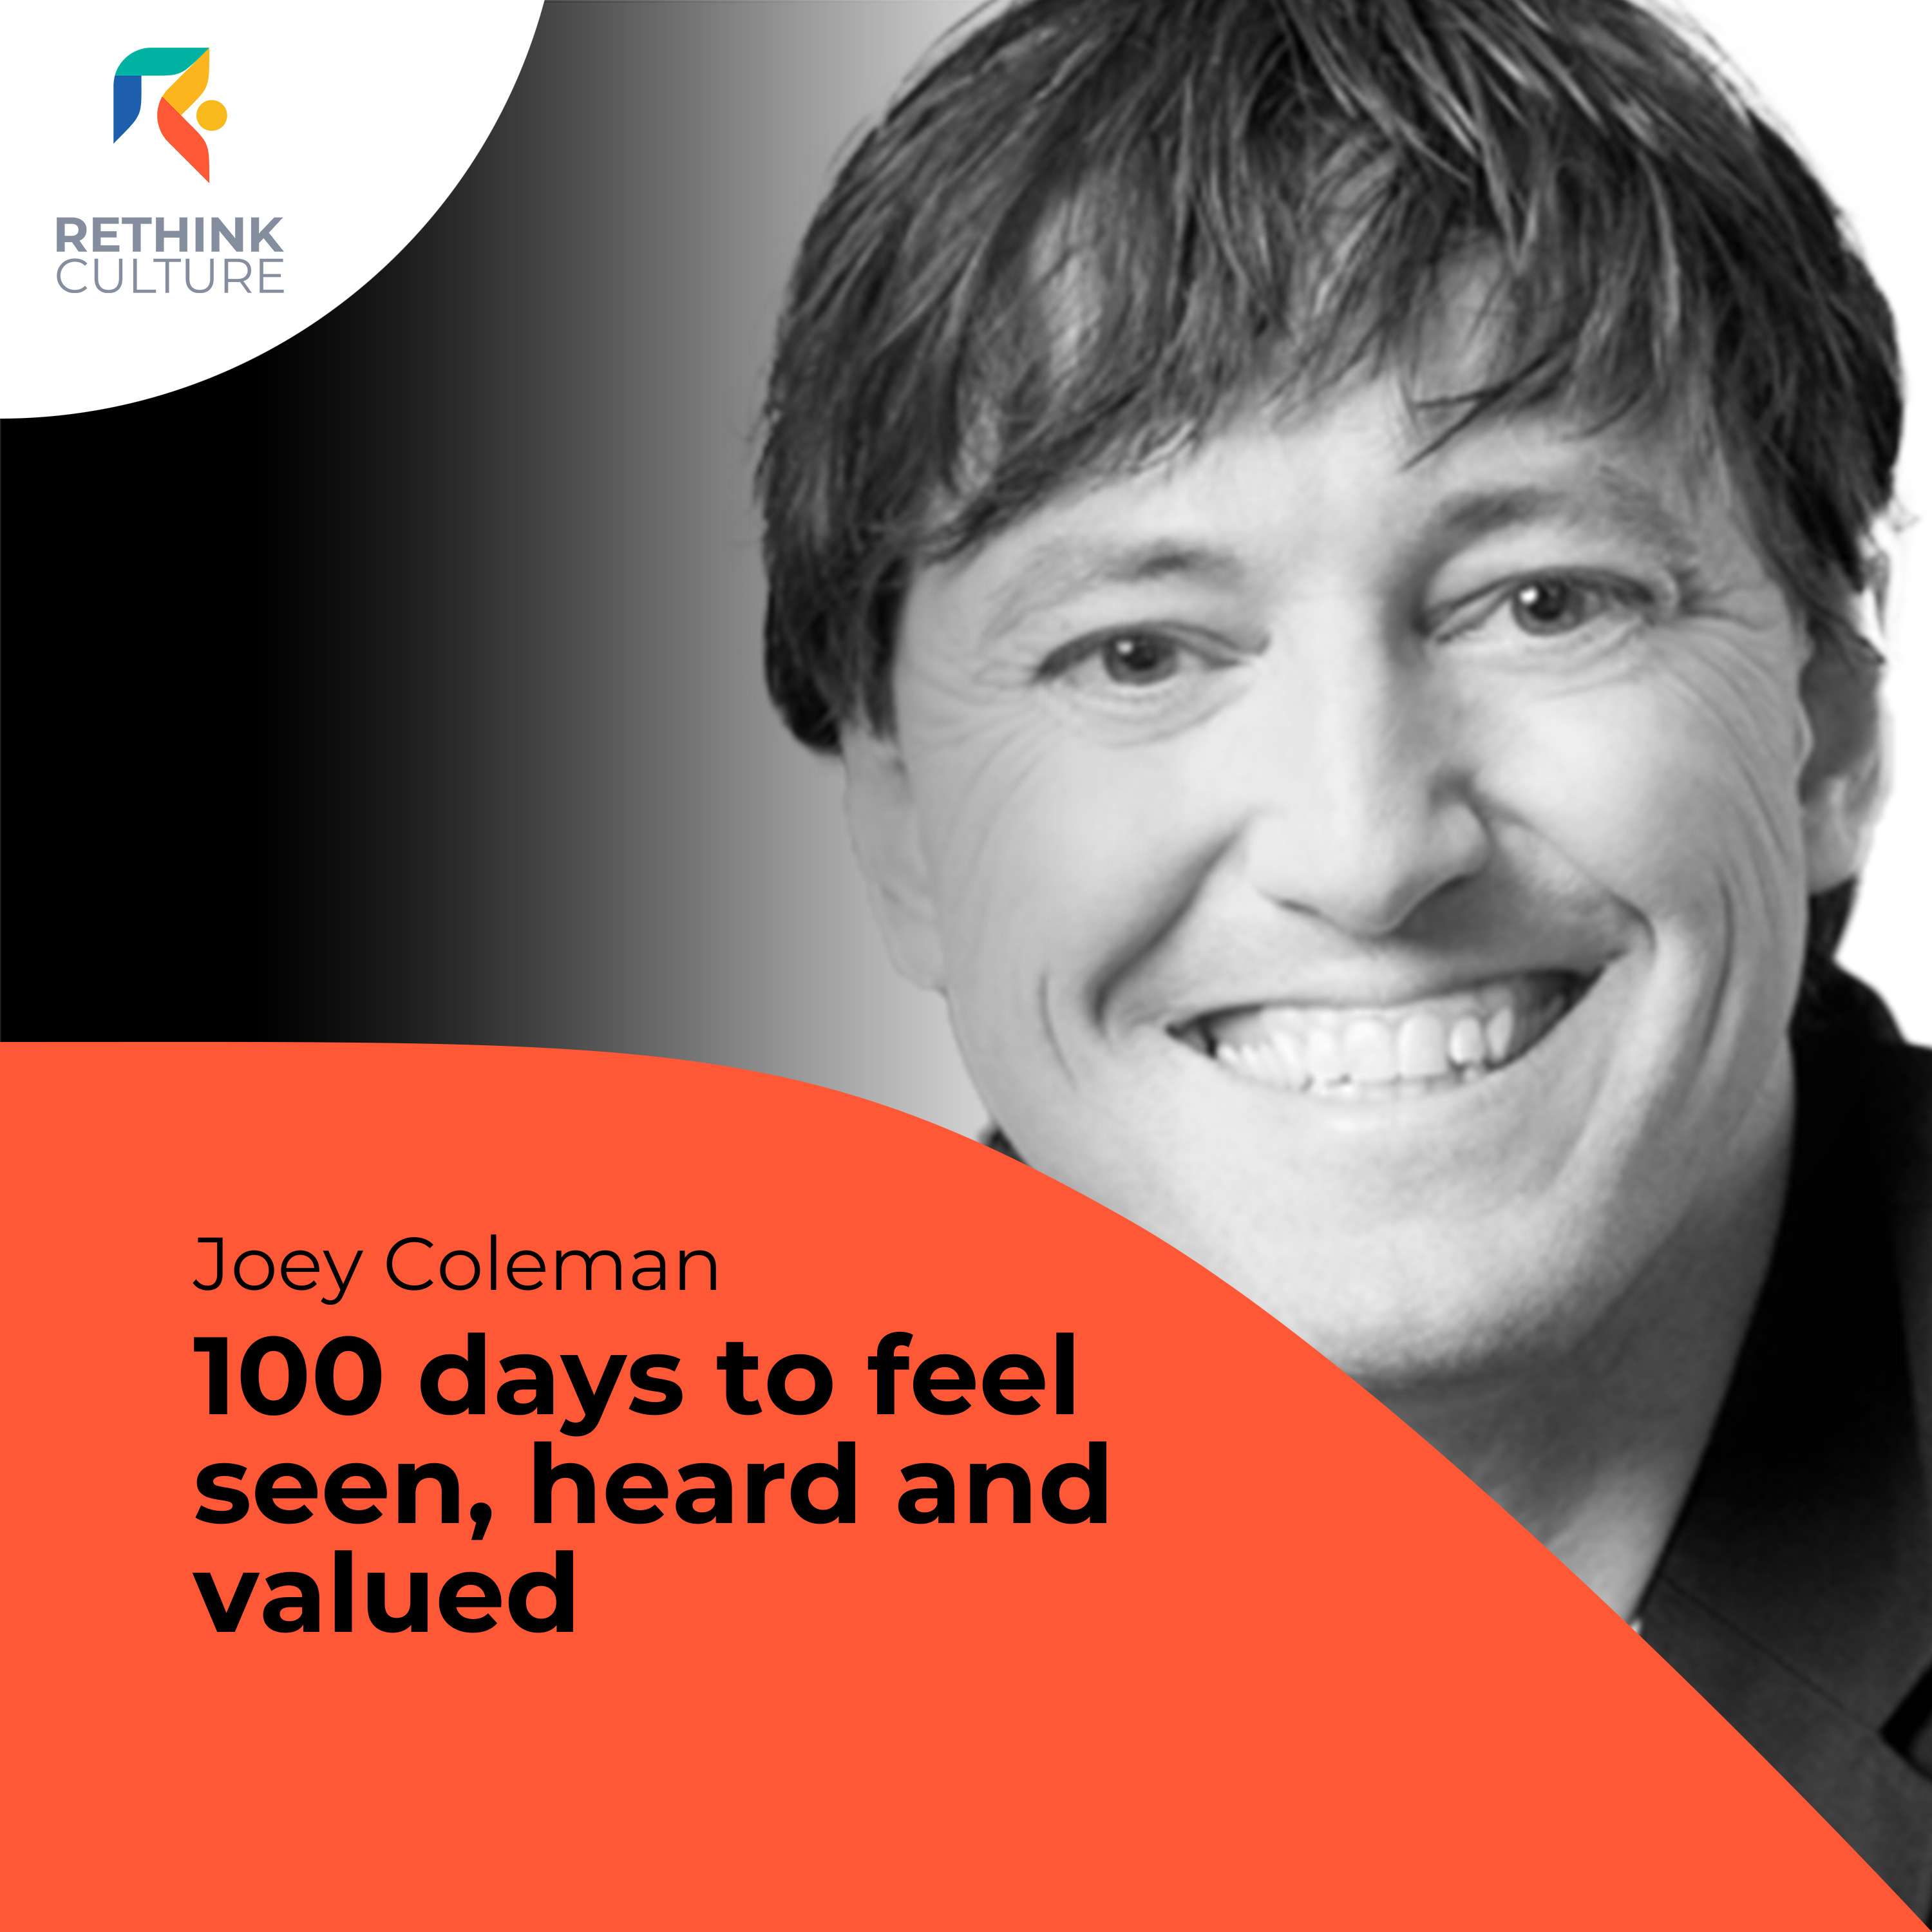 S02E04 100 days to feel seen, heard and valued, with Joey Coleman